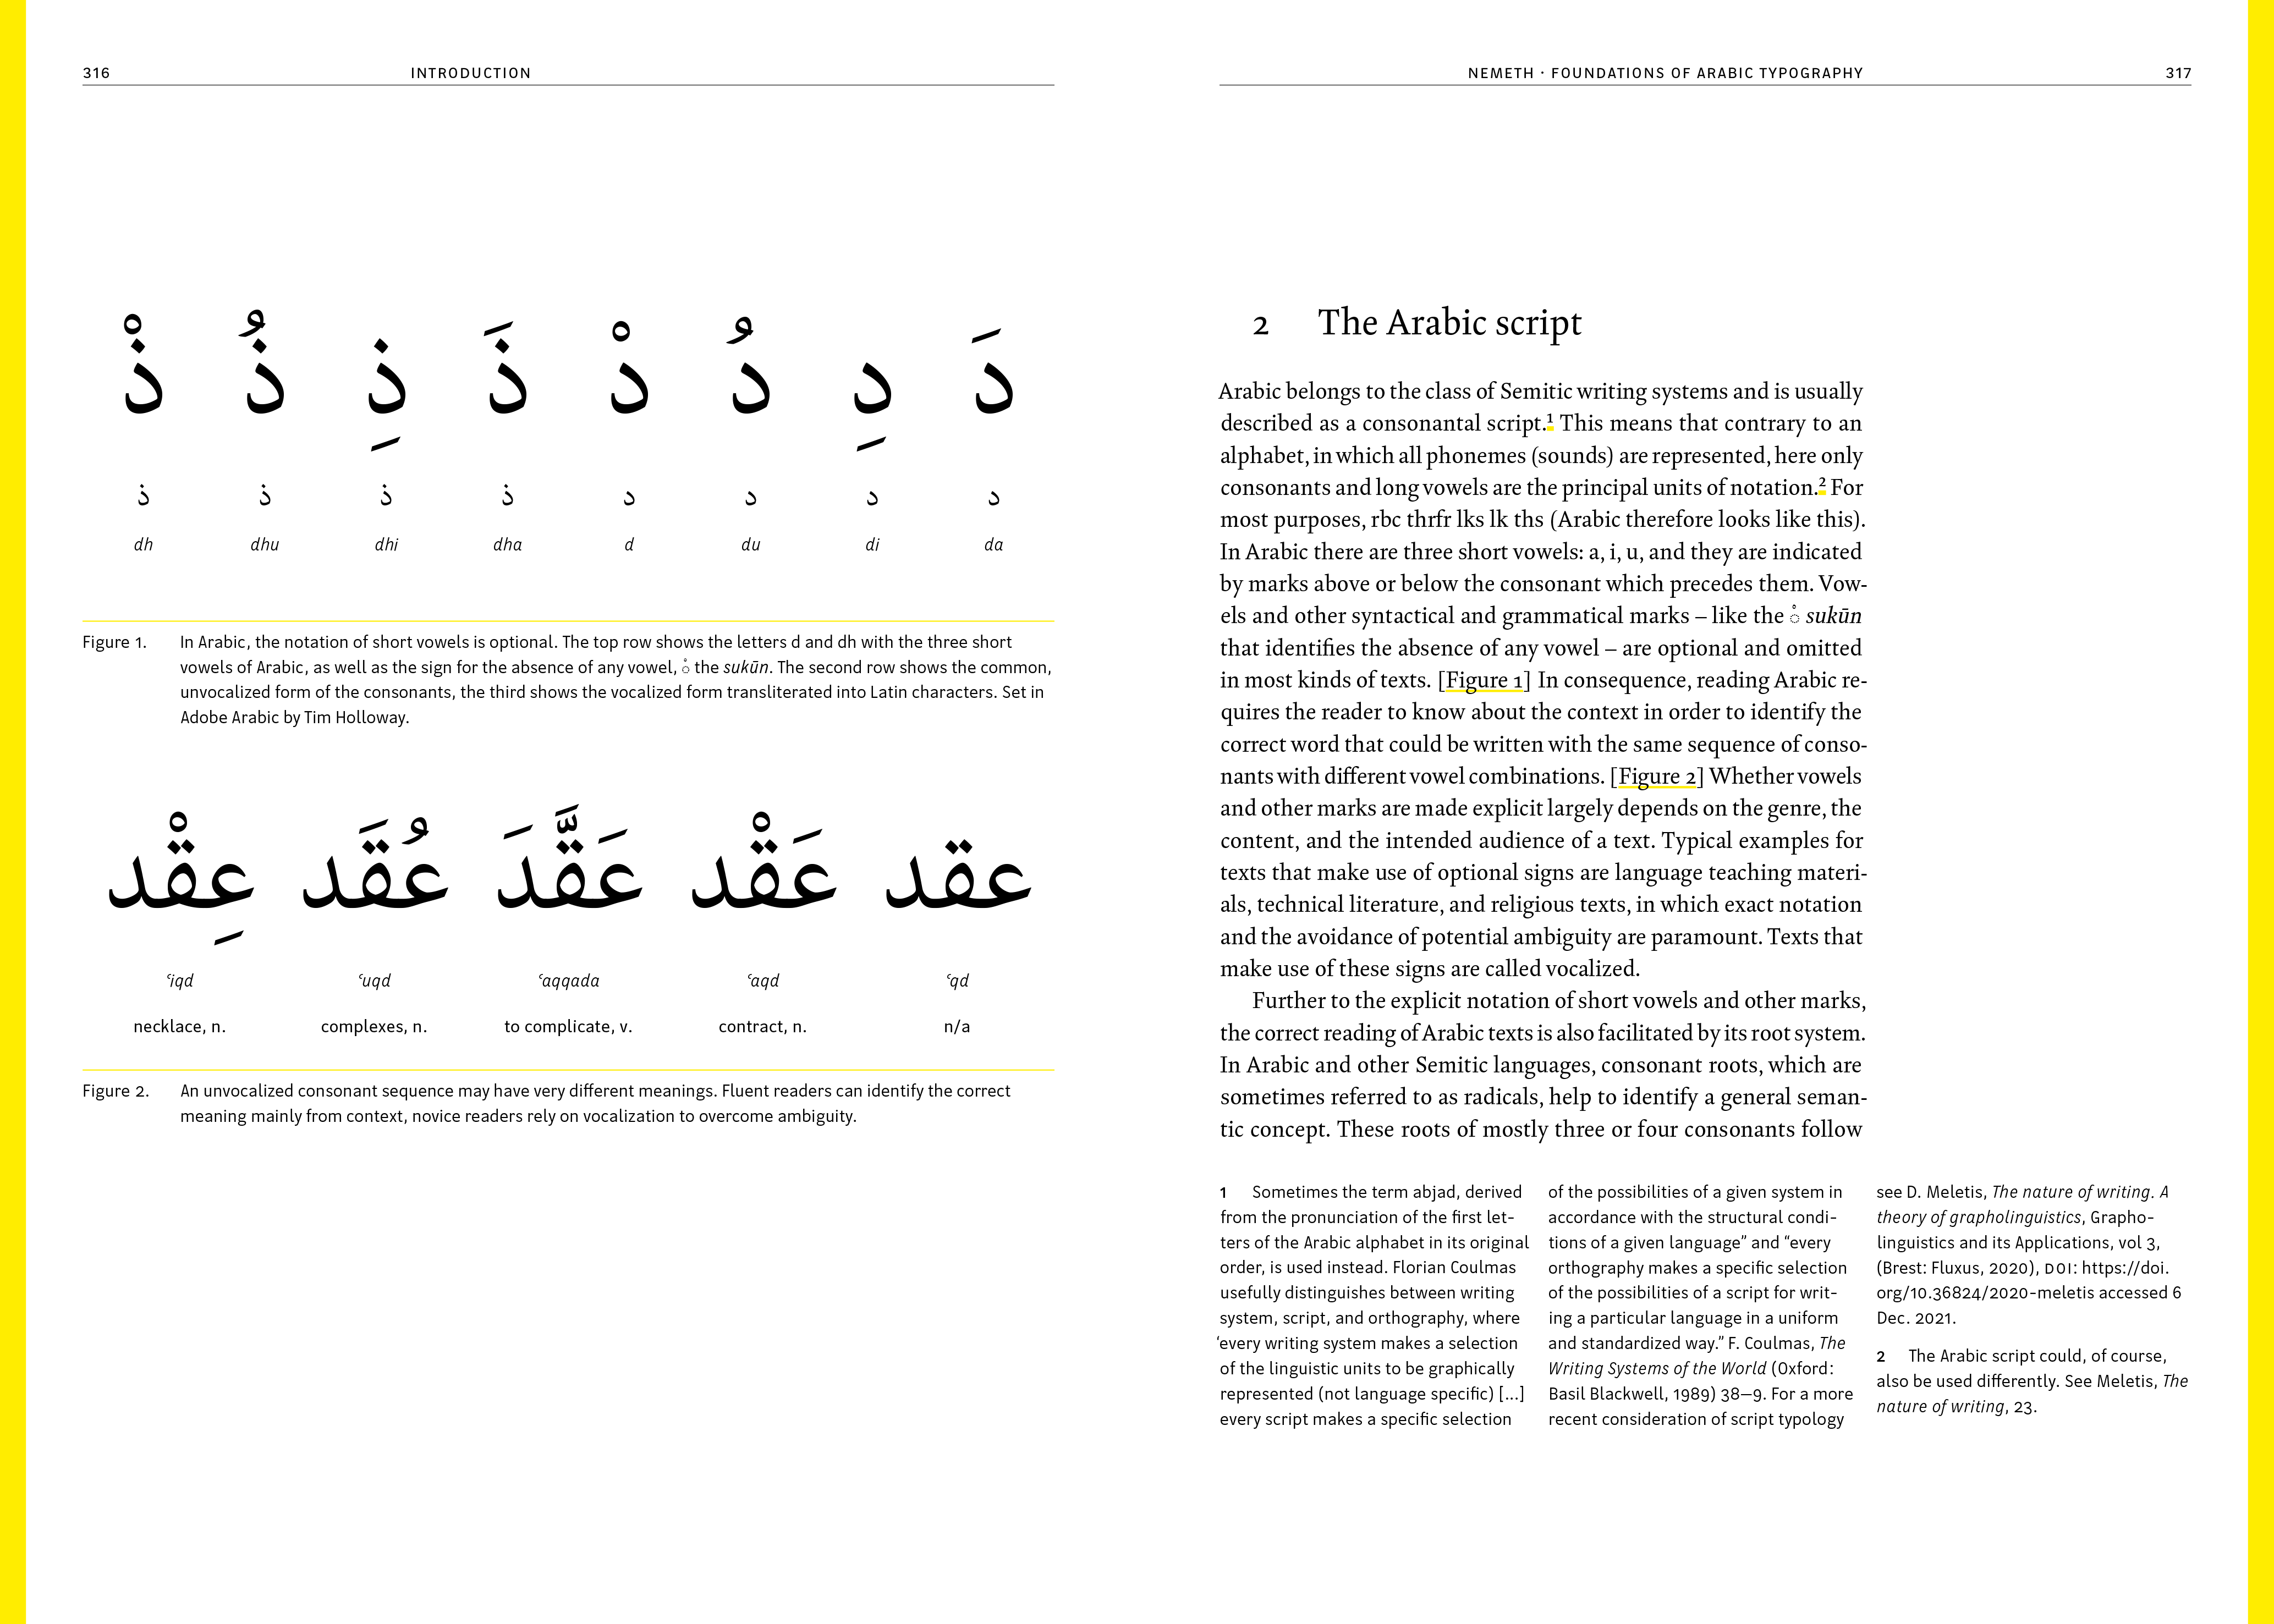 Arabic Typography: History and Practice pages 316-317